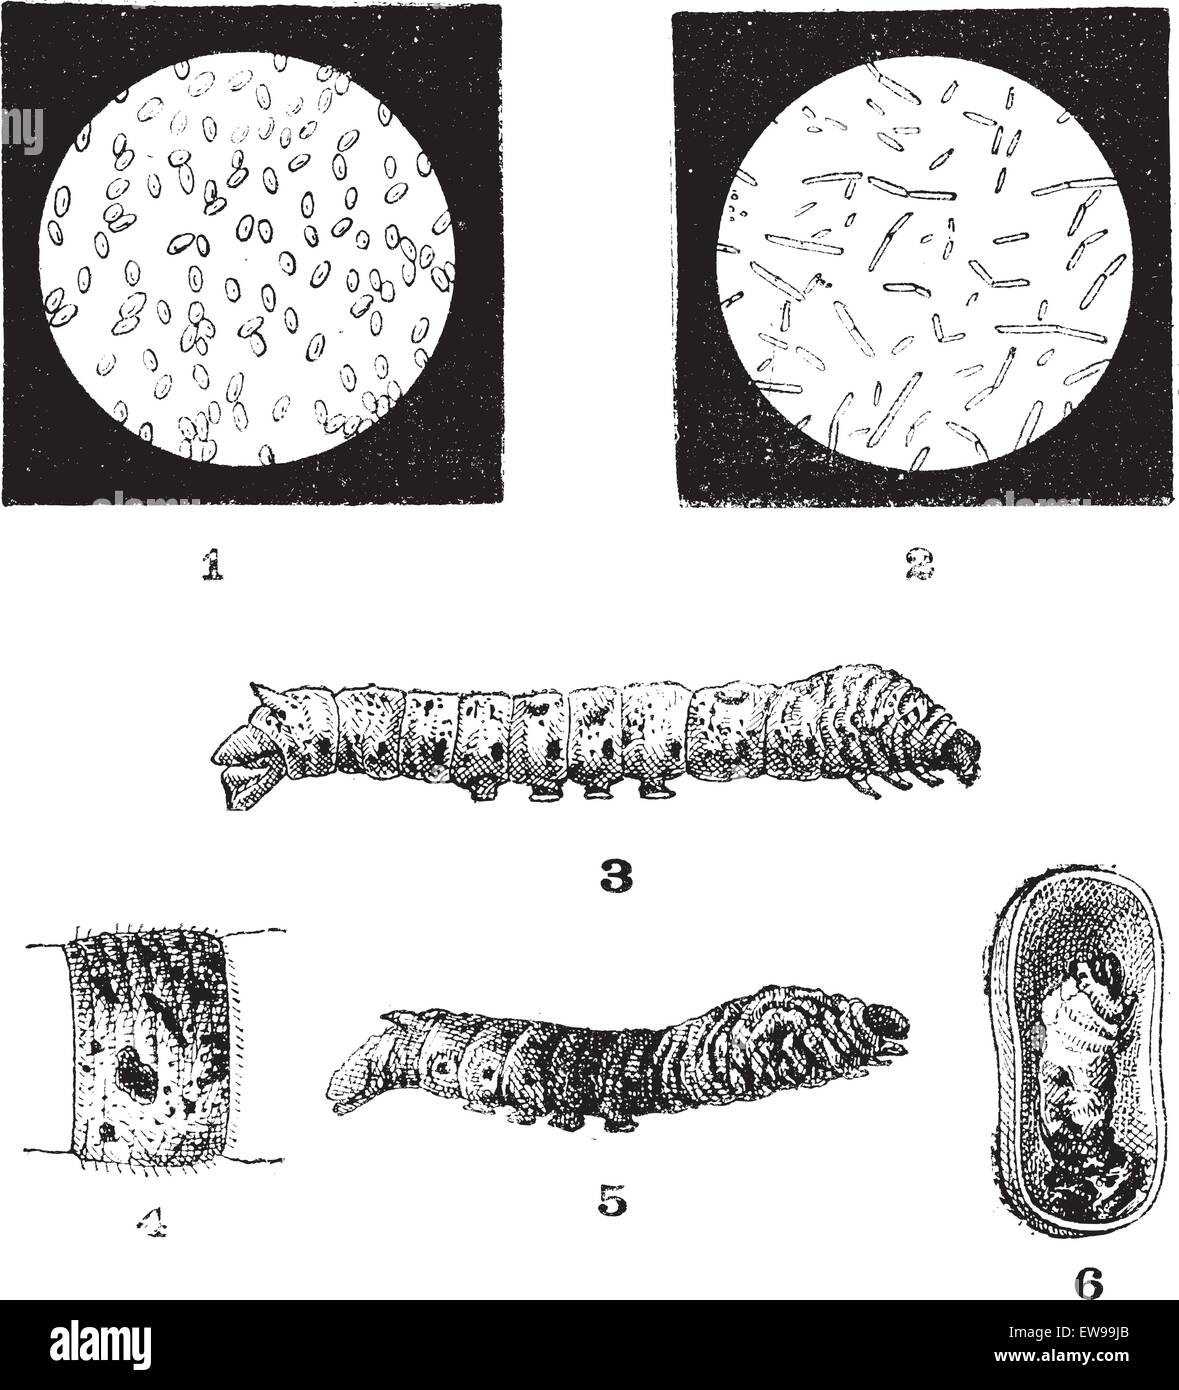 Diseases of Silkworms, vintage engraved illustration. Dictionary of Words and Things - Larive and Fleury - 1895 Stock Vector